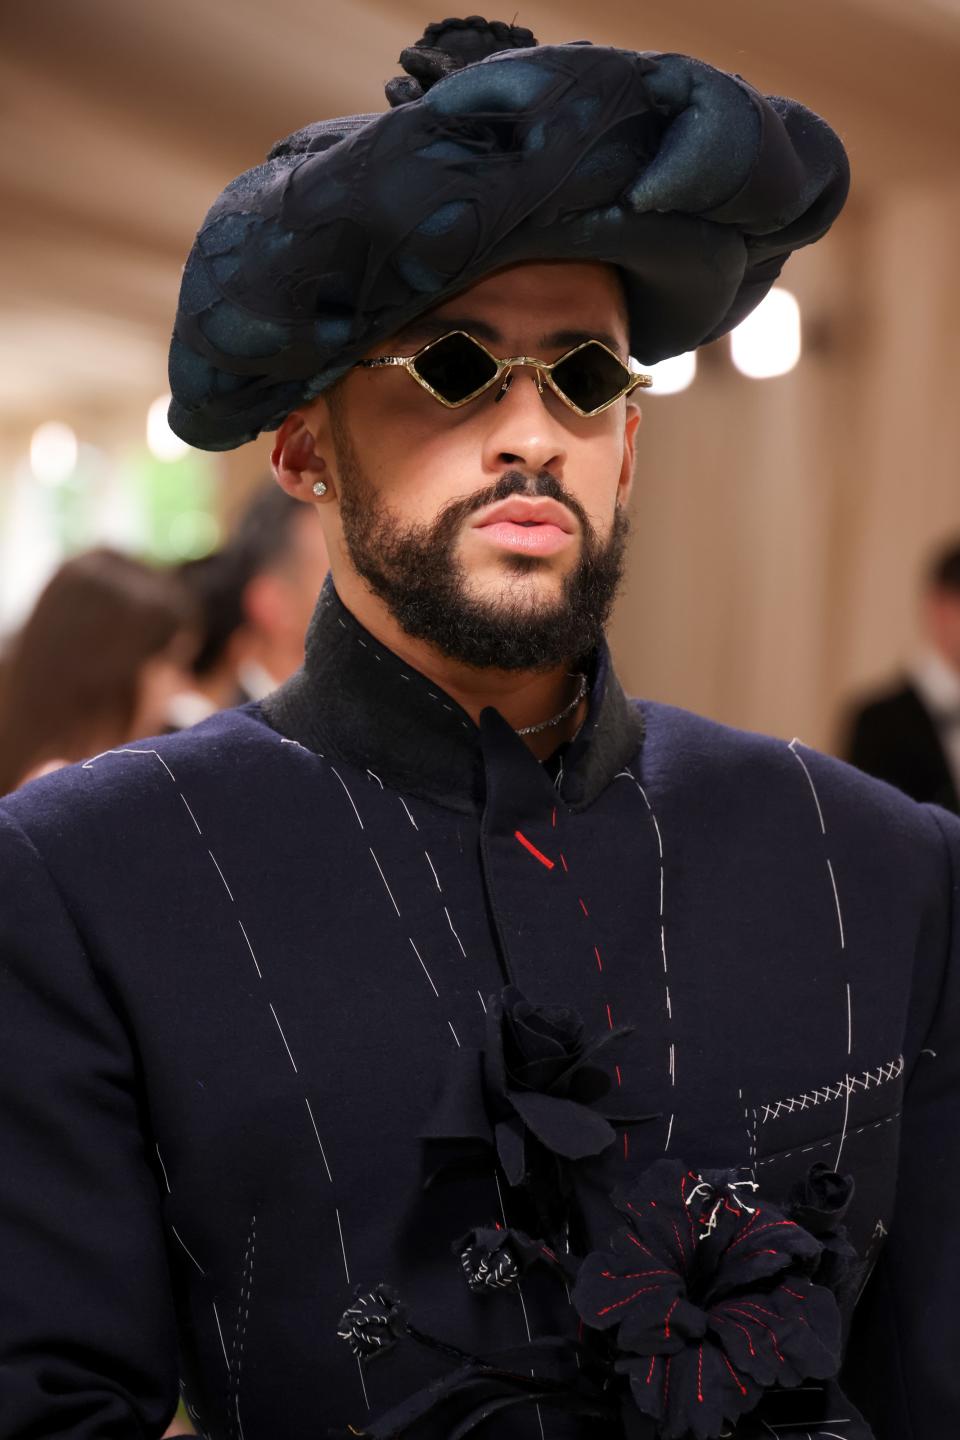 Bad Bunny wearing a sculptural hat, sunglasses, and a dark jacket with line patterns and floral adornment